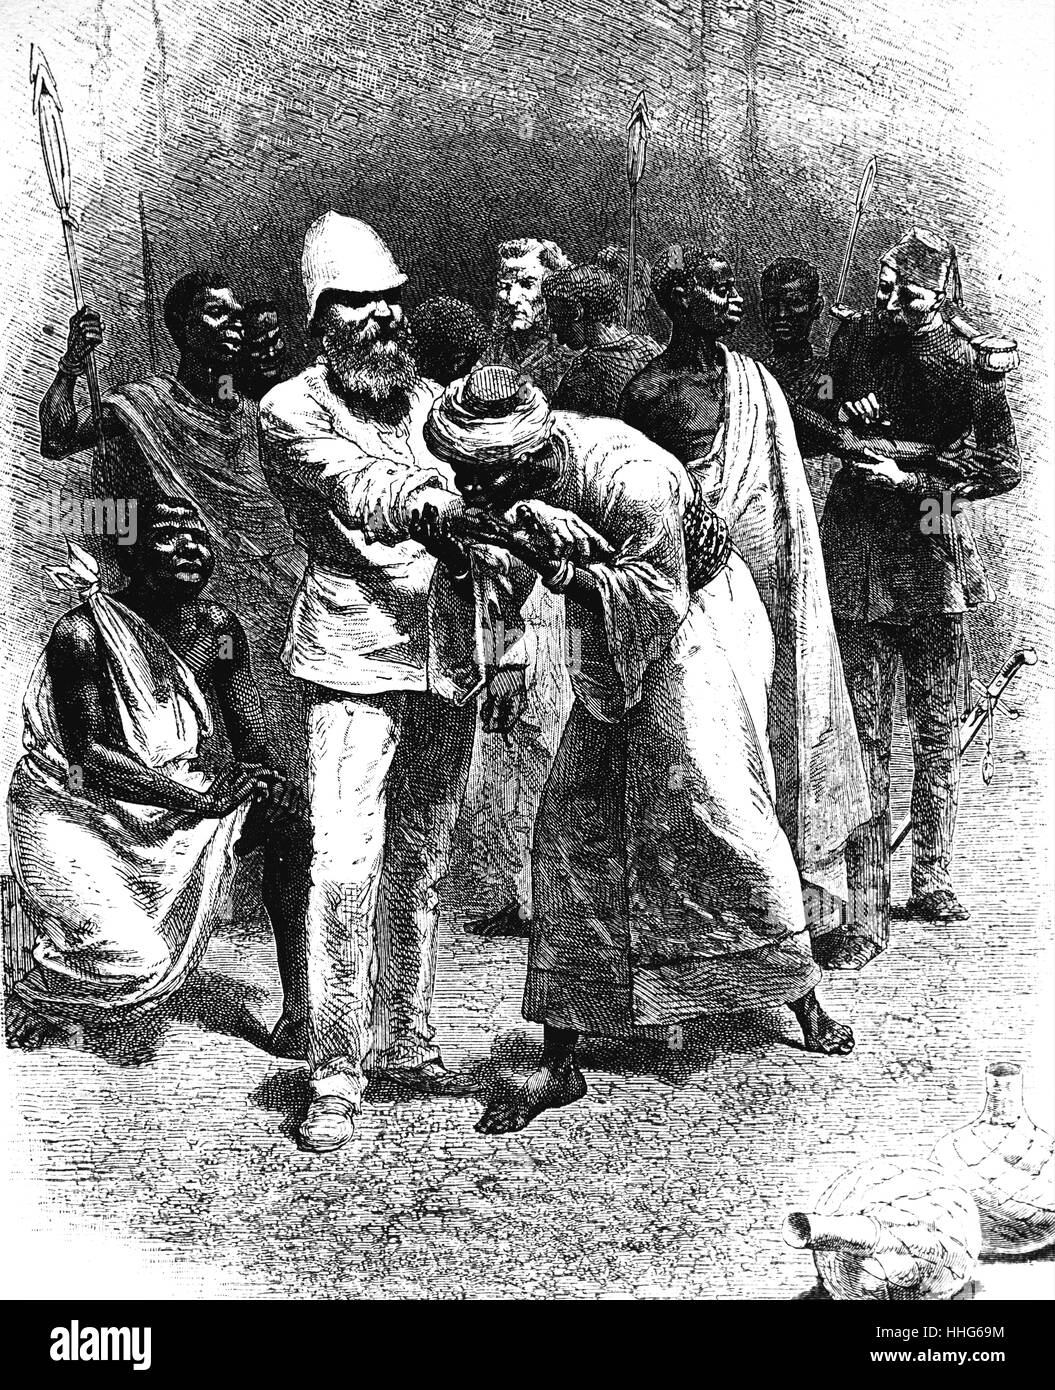 Samuel BAKER (1821-93) English explorer and anti-slavery campaigner, making a blood pact with King Rionga during his command of expedition mounted by the Khedive of Egypt to suppress slavery near Albert Nyanza, 1872. Stock Photo